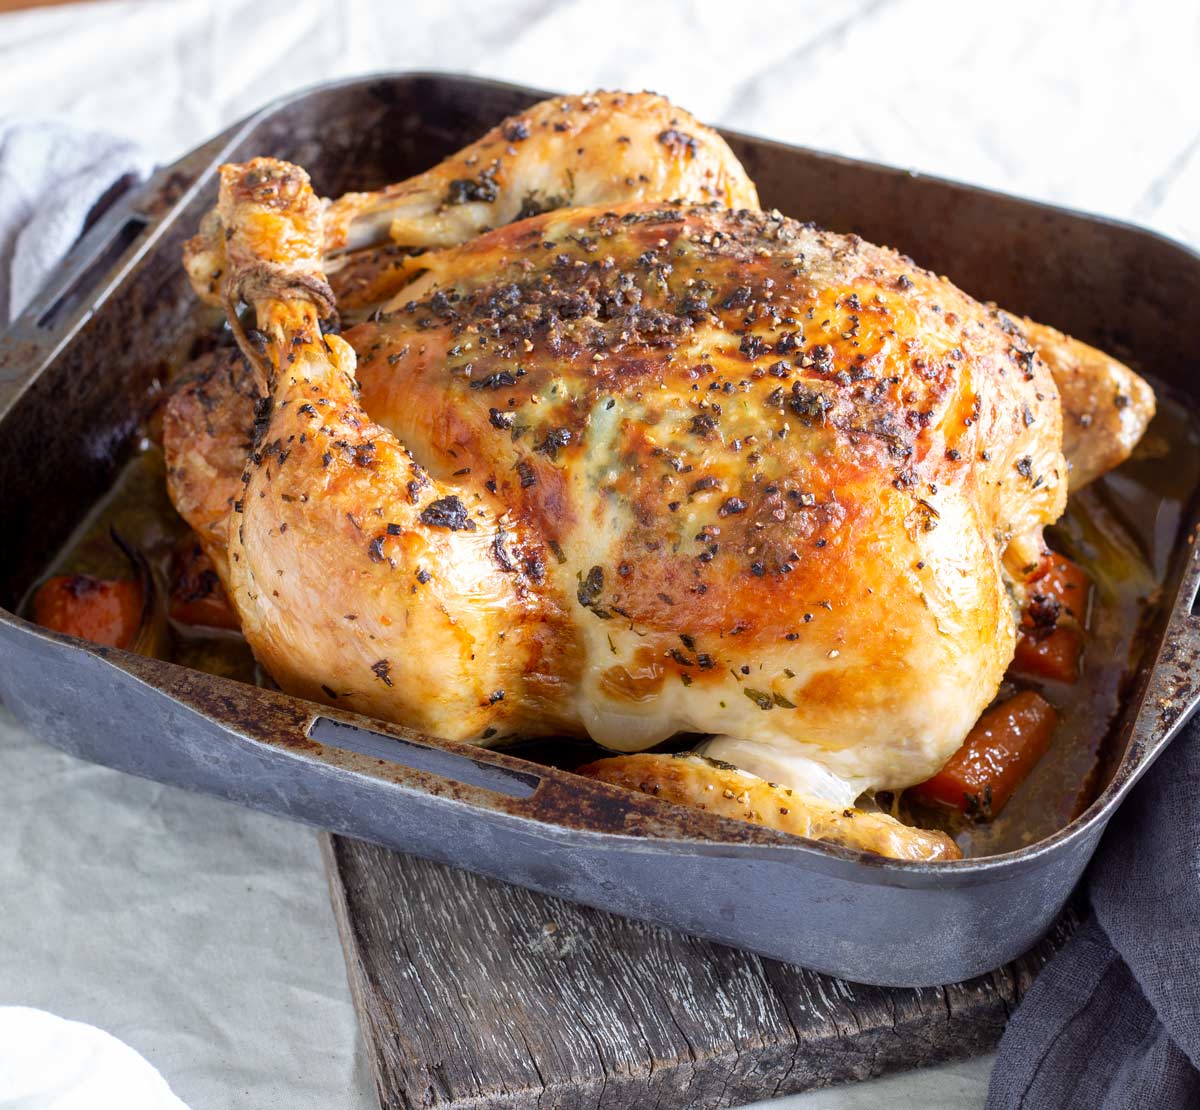 a cooked chicken in a roasting tin with veggies